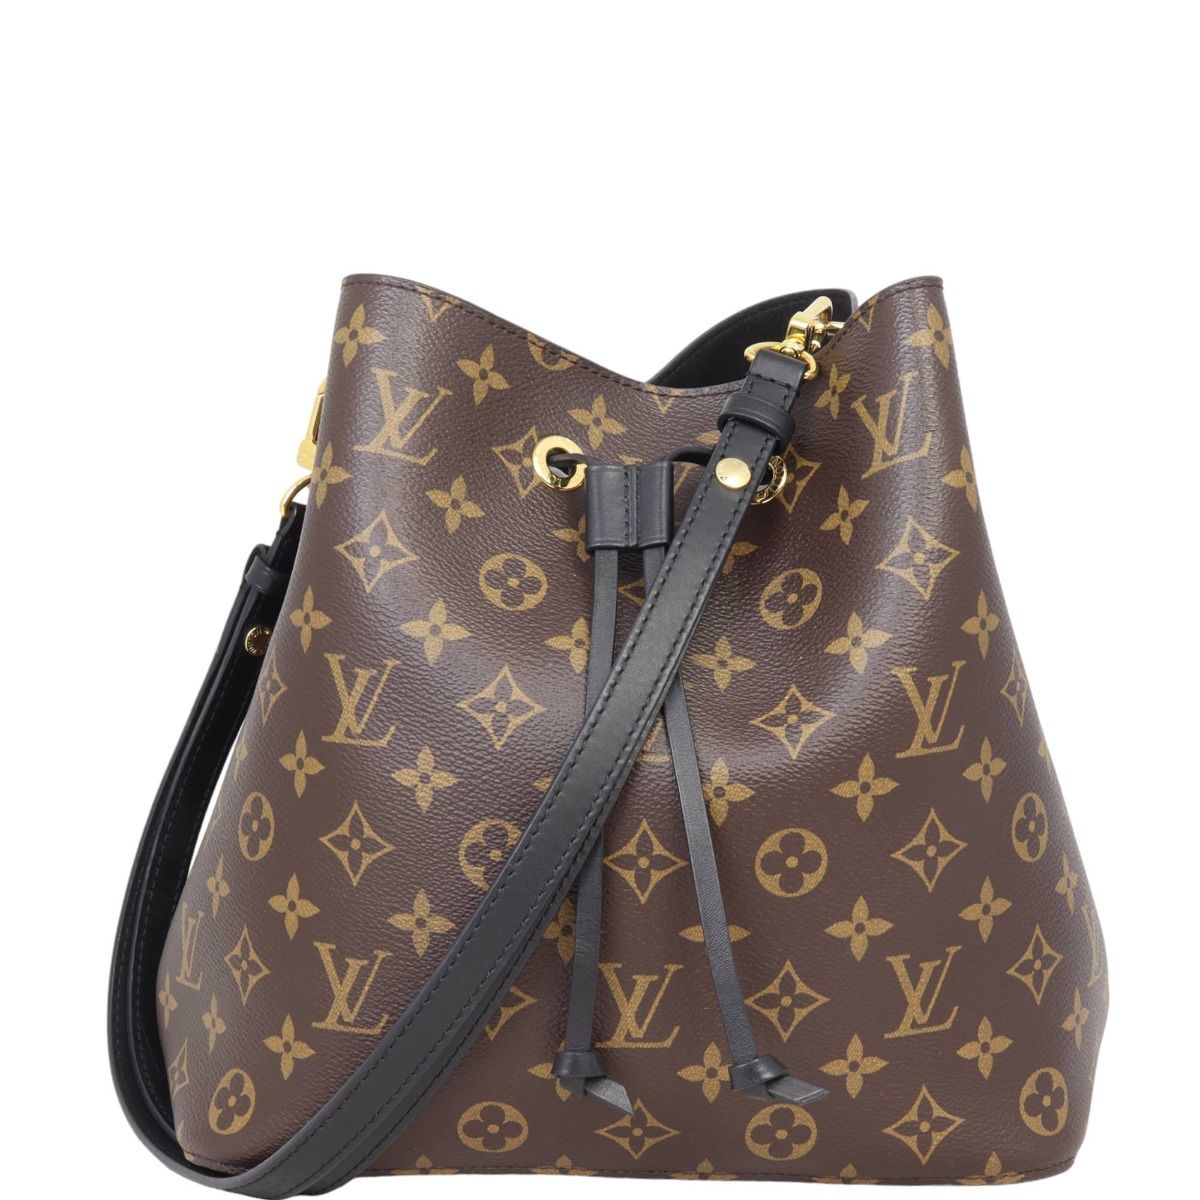 FWRD Renew Louis Vuitton Taurillon On My Side MM Bag in Black